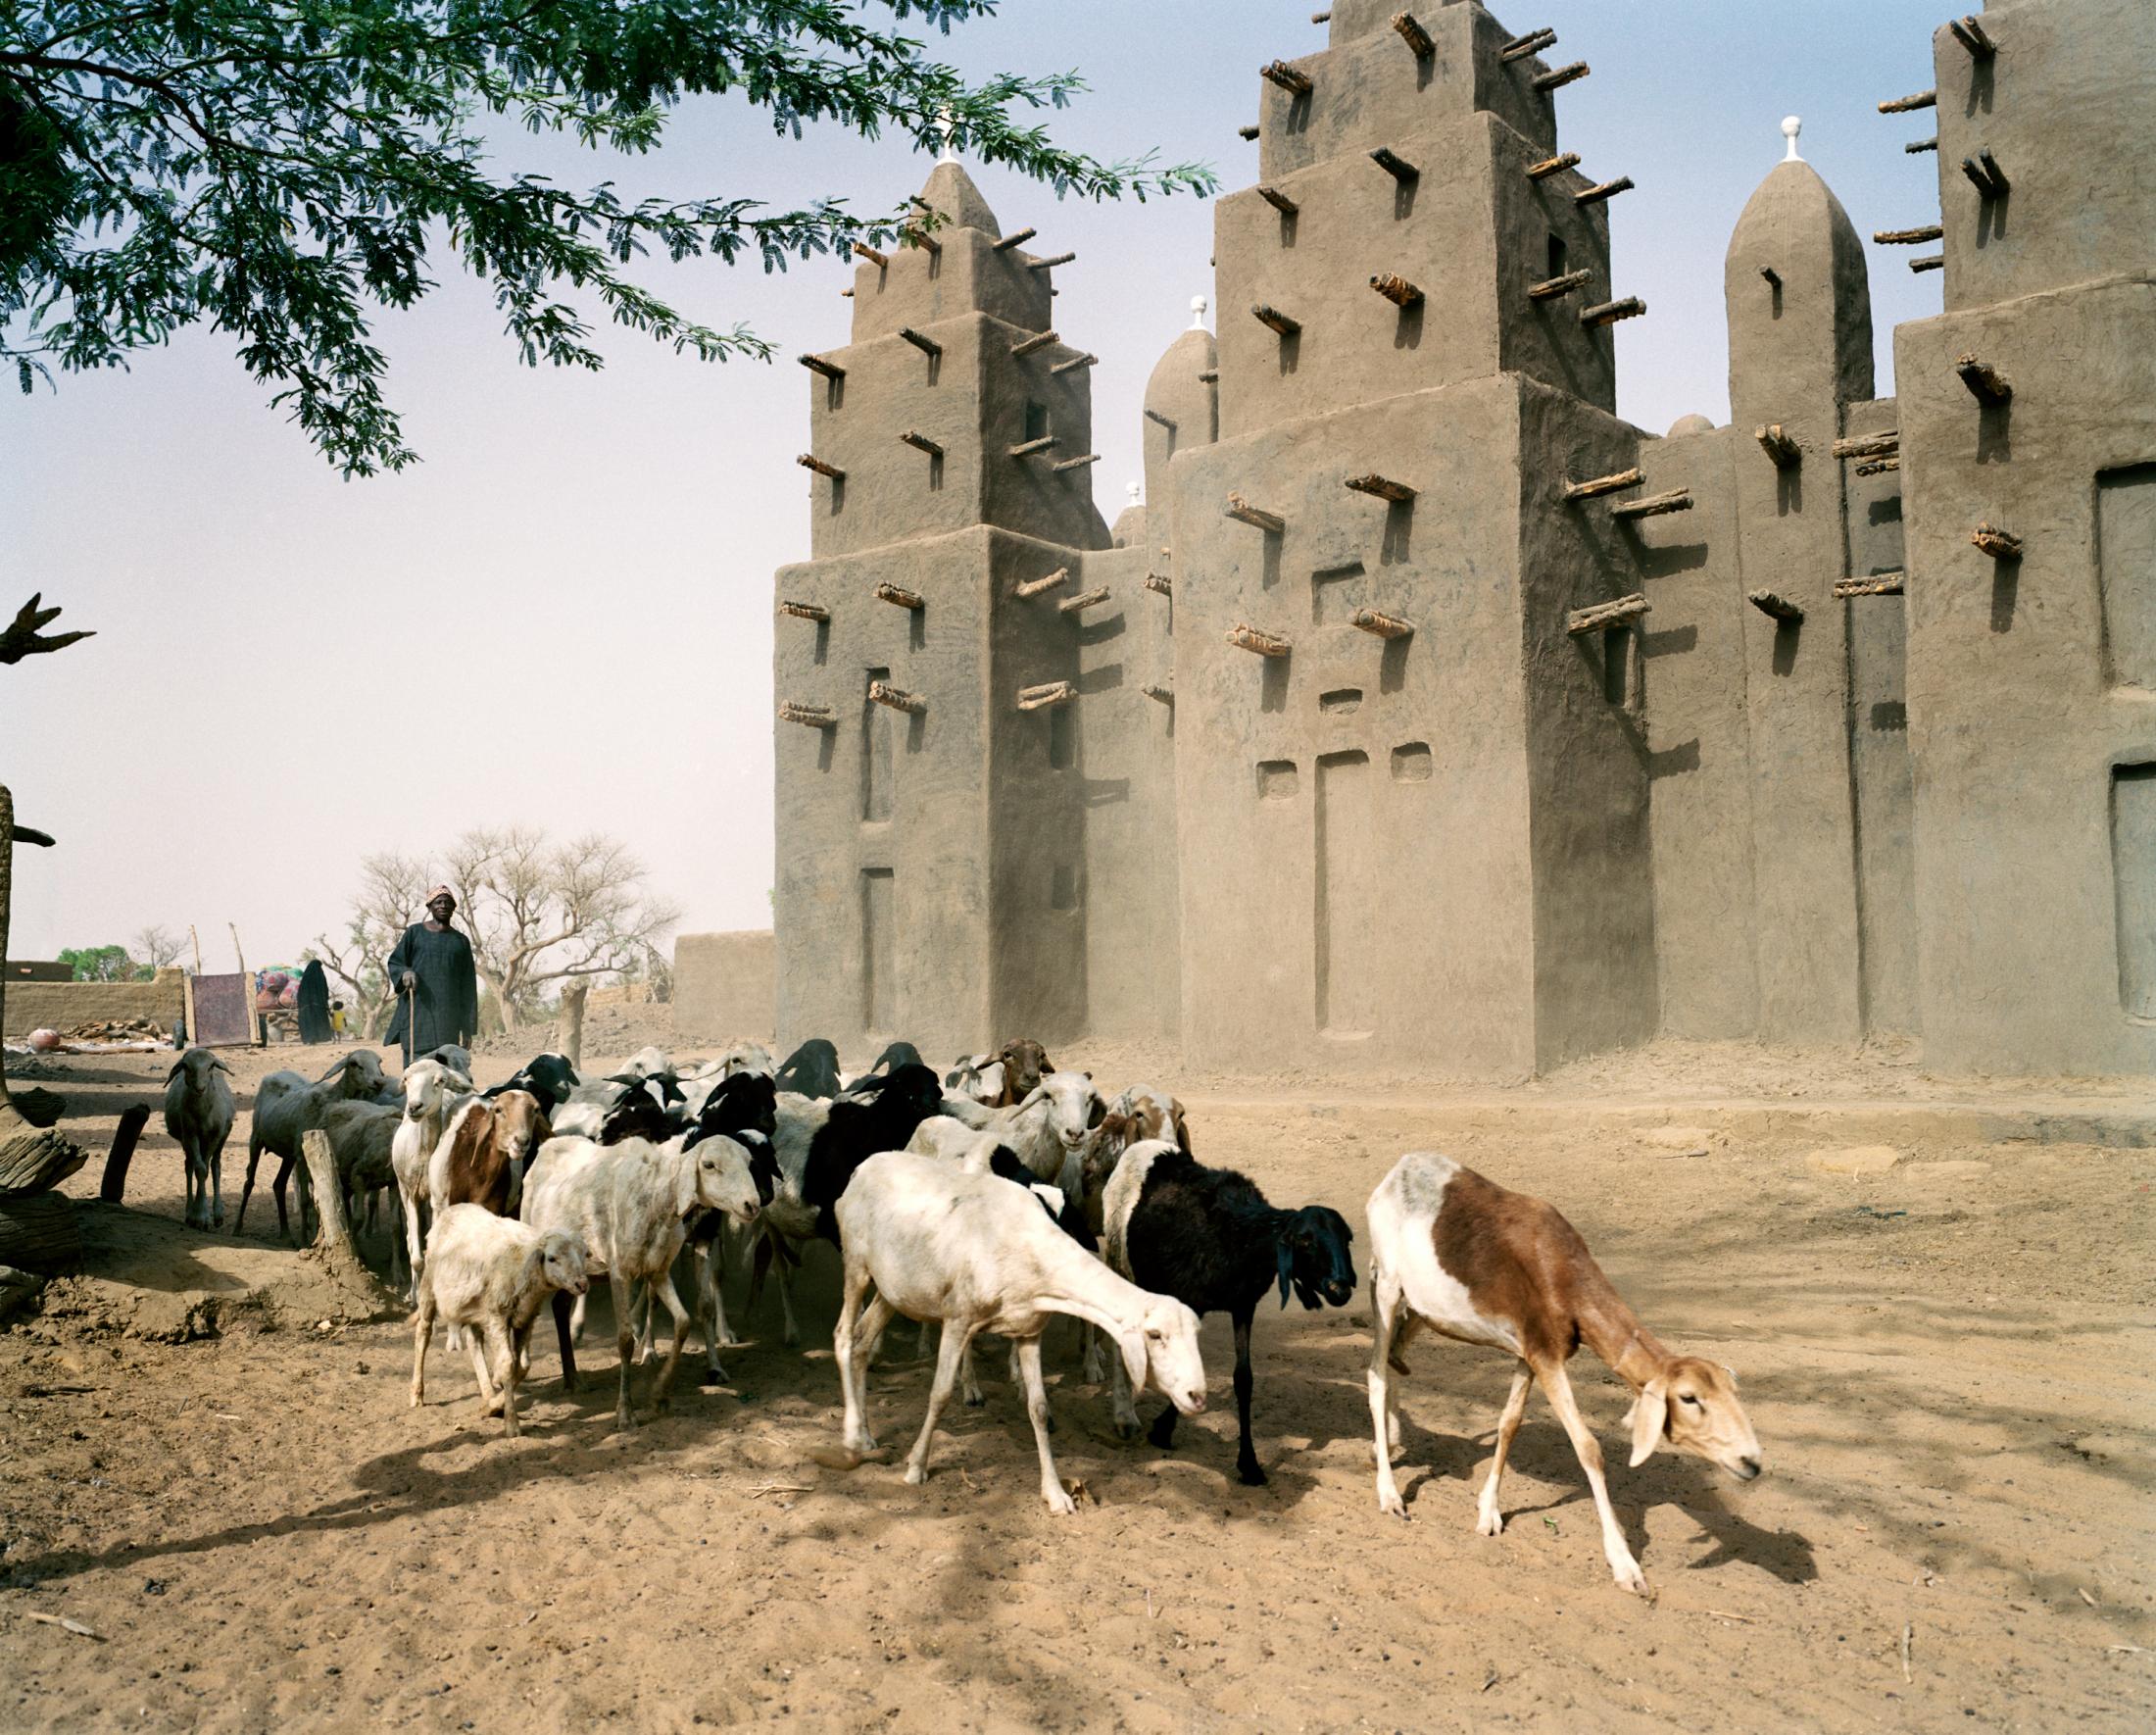 Shephers passing the village mosque. Tinto, Mali. 2007.